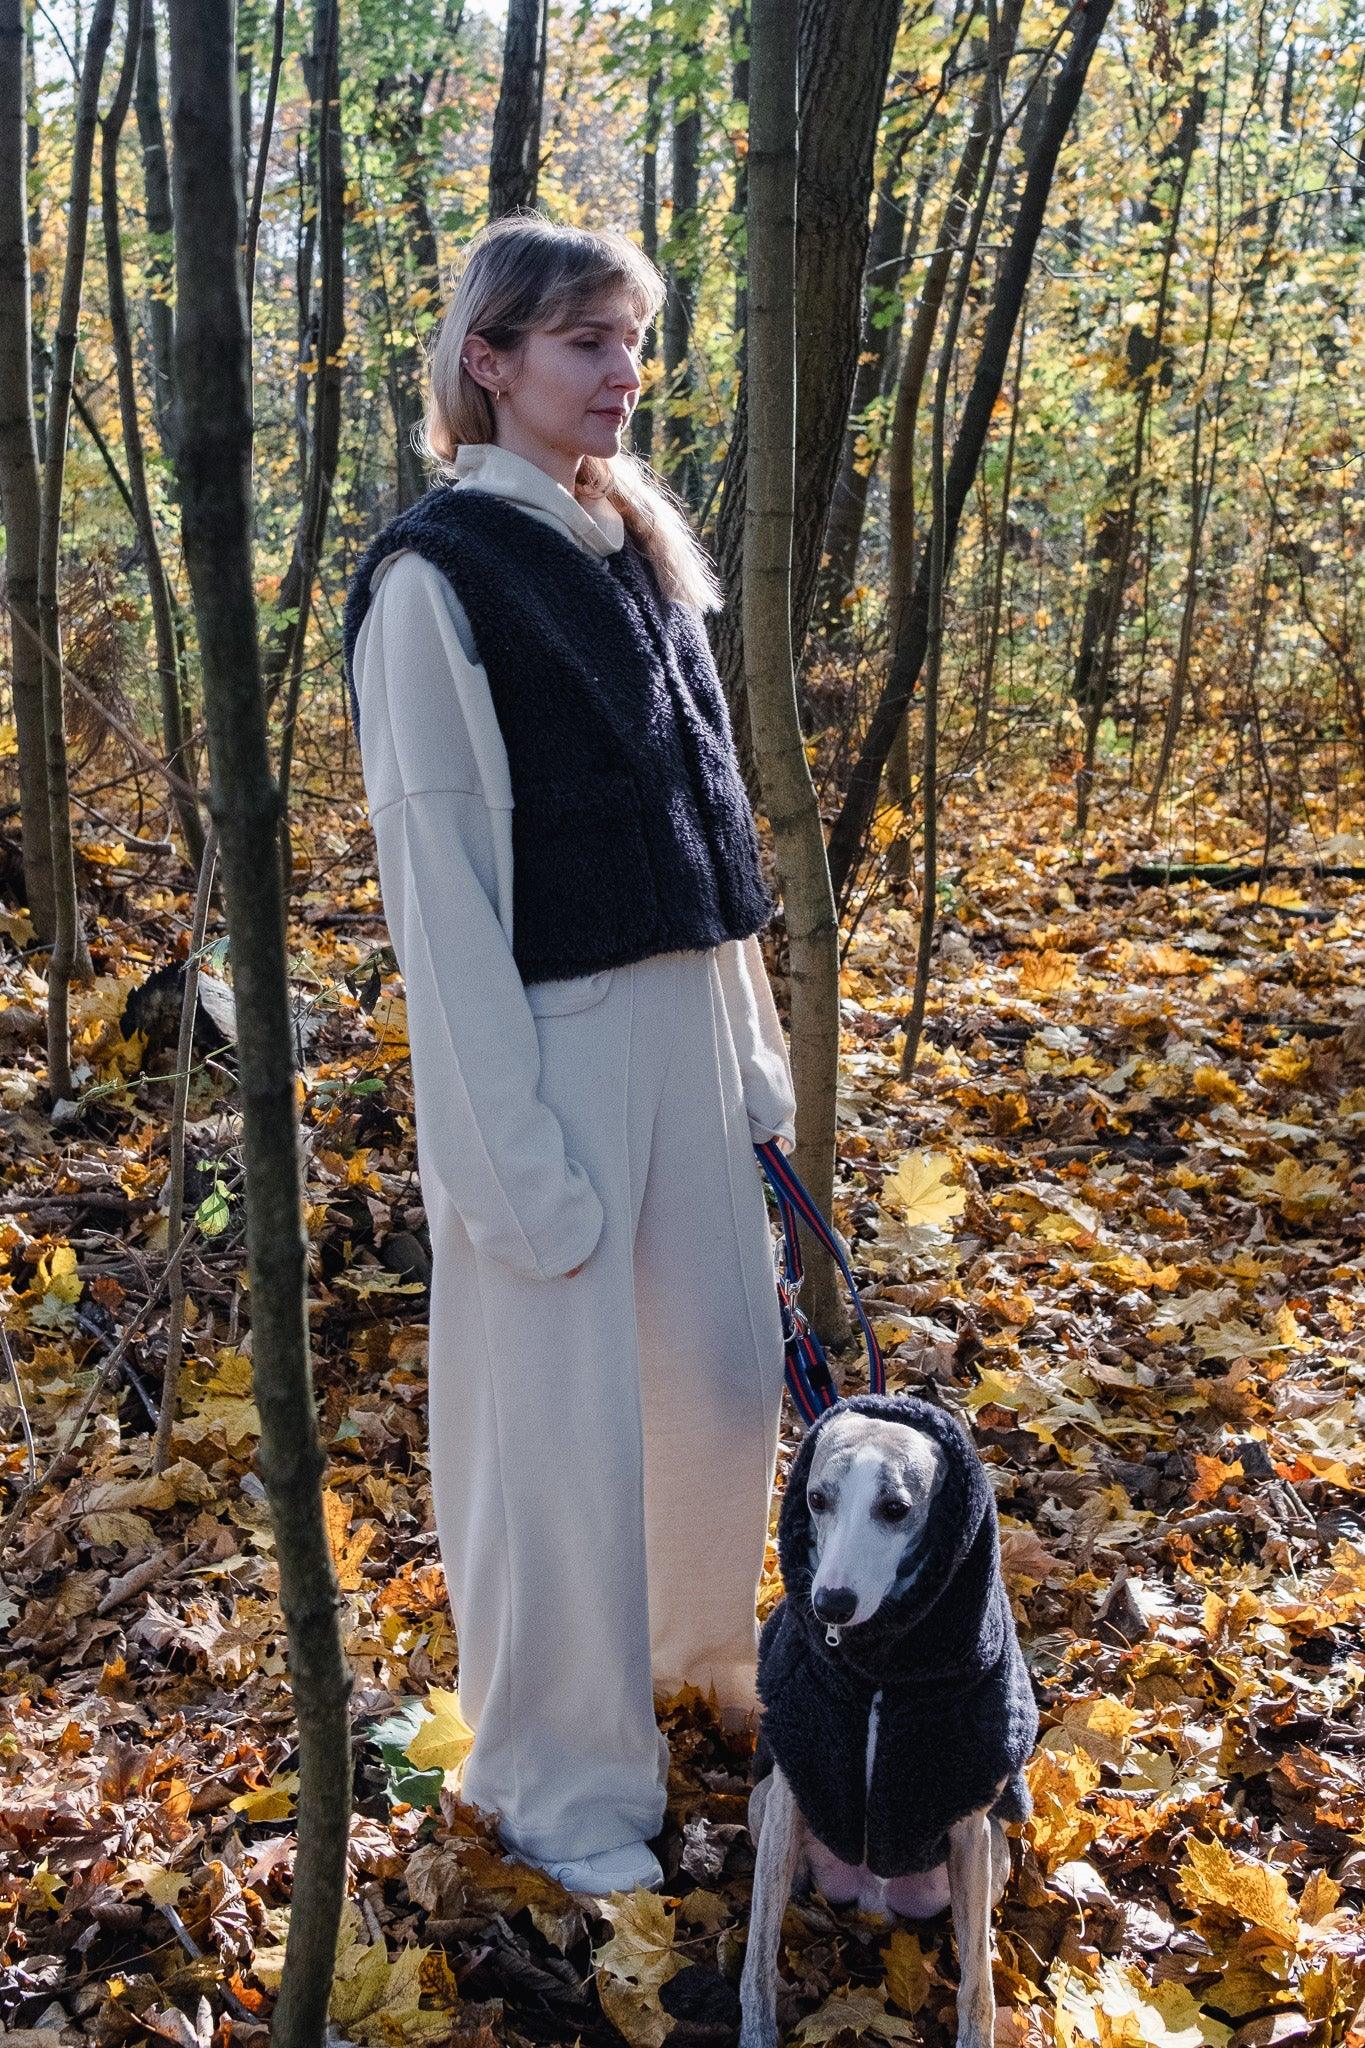 A woman standing next to a Woolen Dog Vest - Charcoal from Mellow Pet Store in the eco-friendly woods.